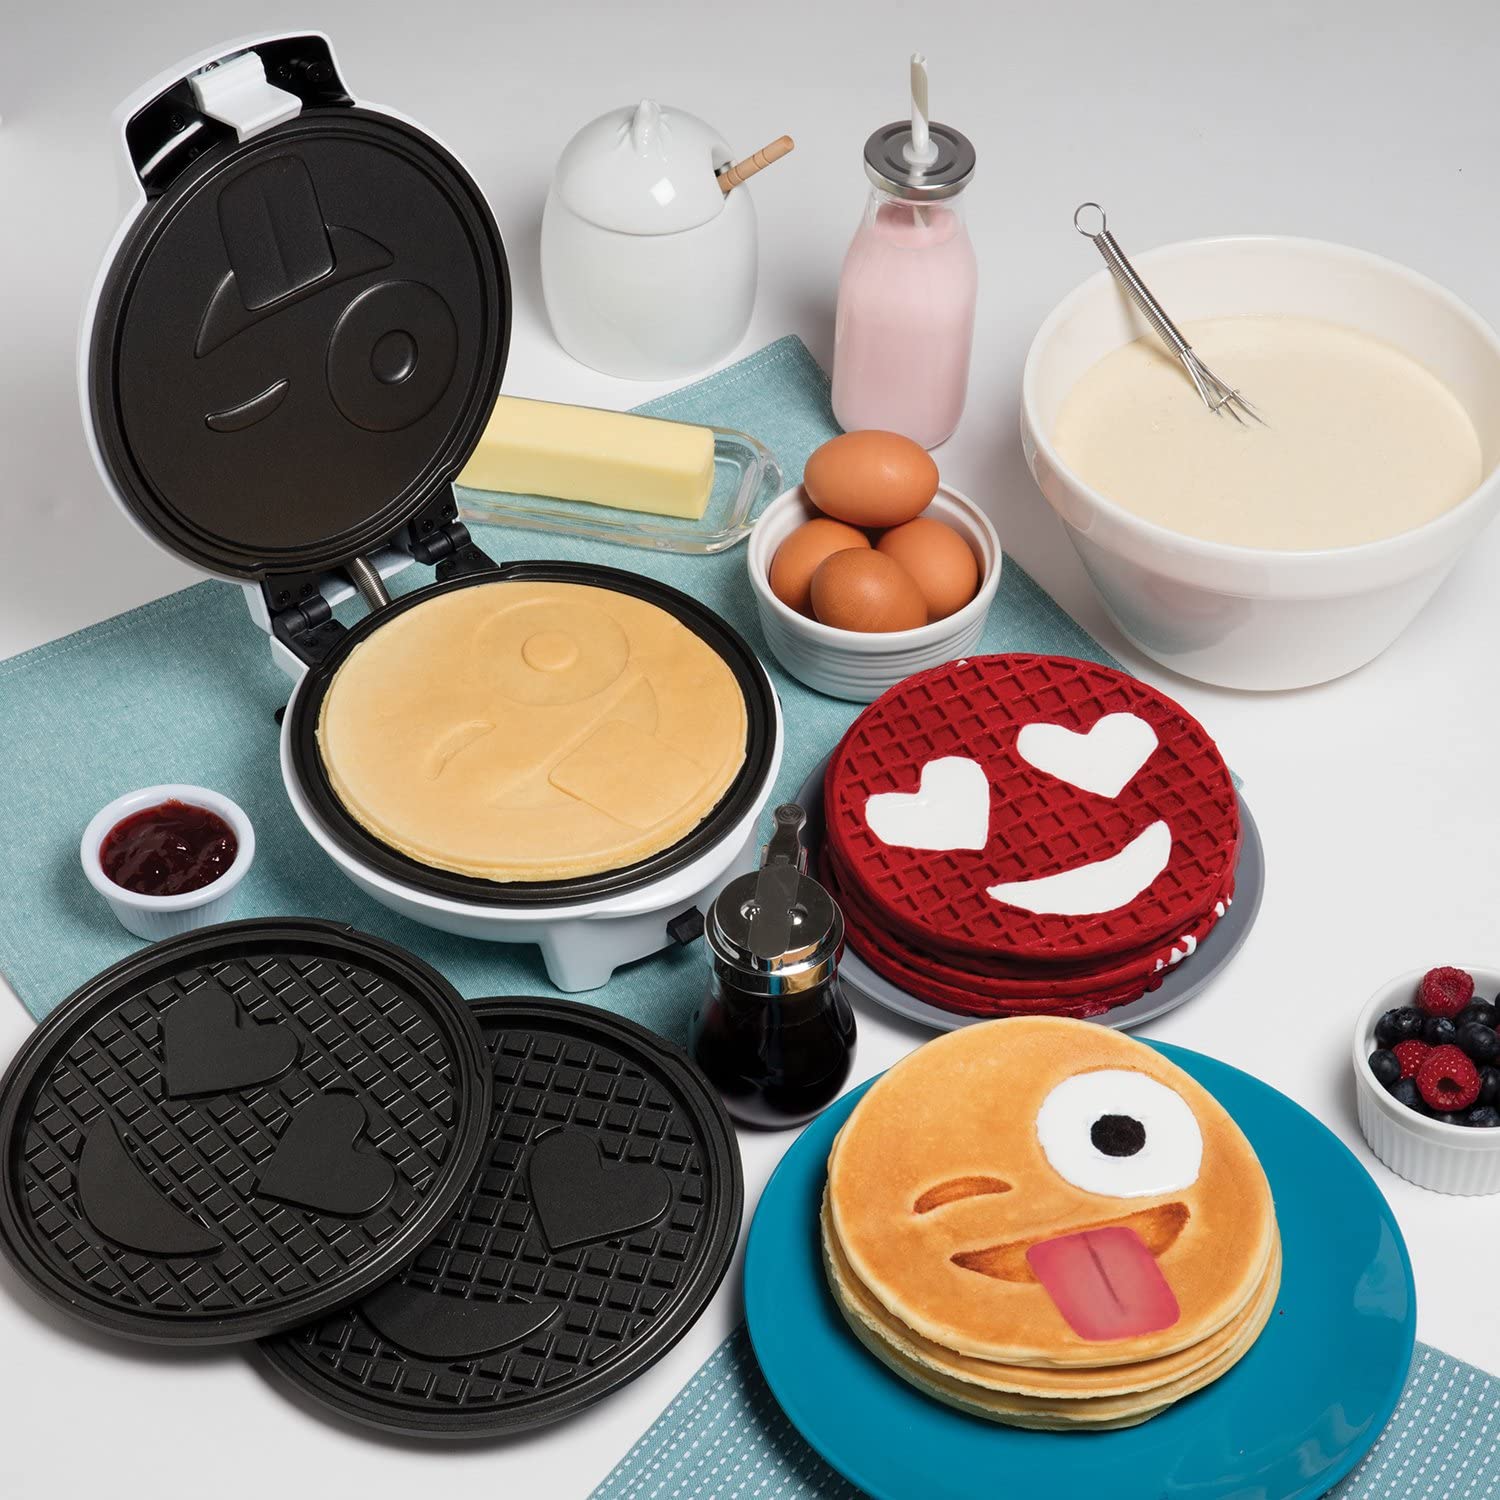 10 Novelty Waffle Makers That’ll Make Breakfast More Fun